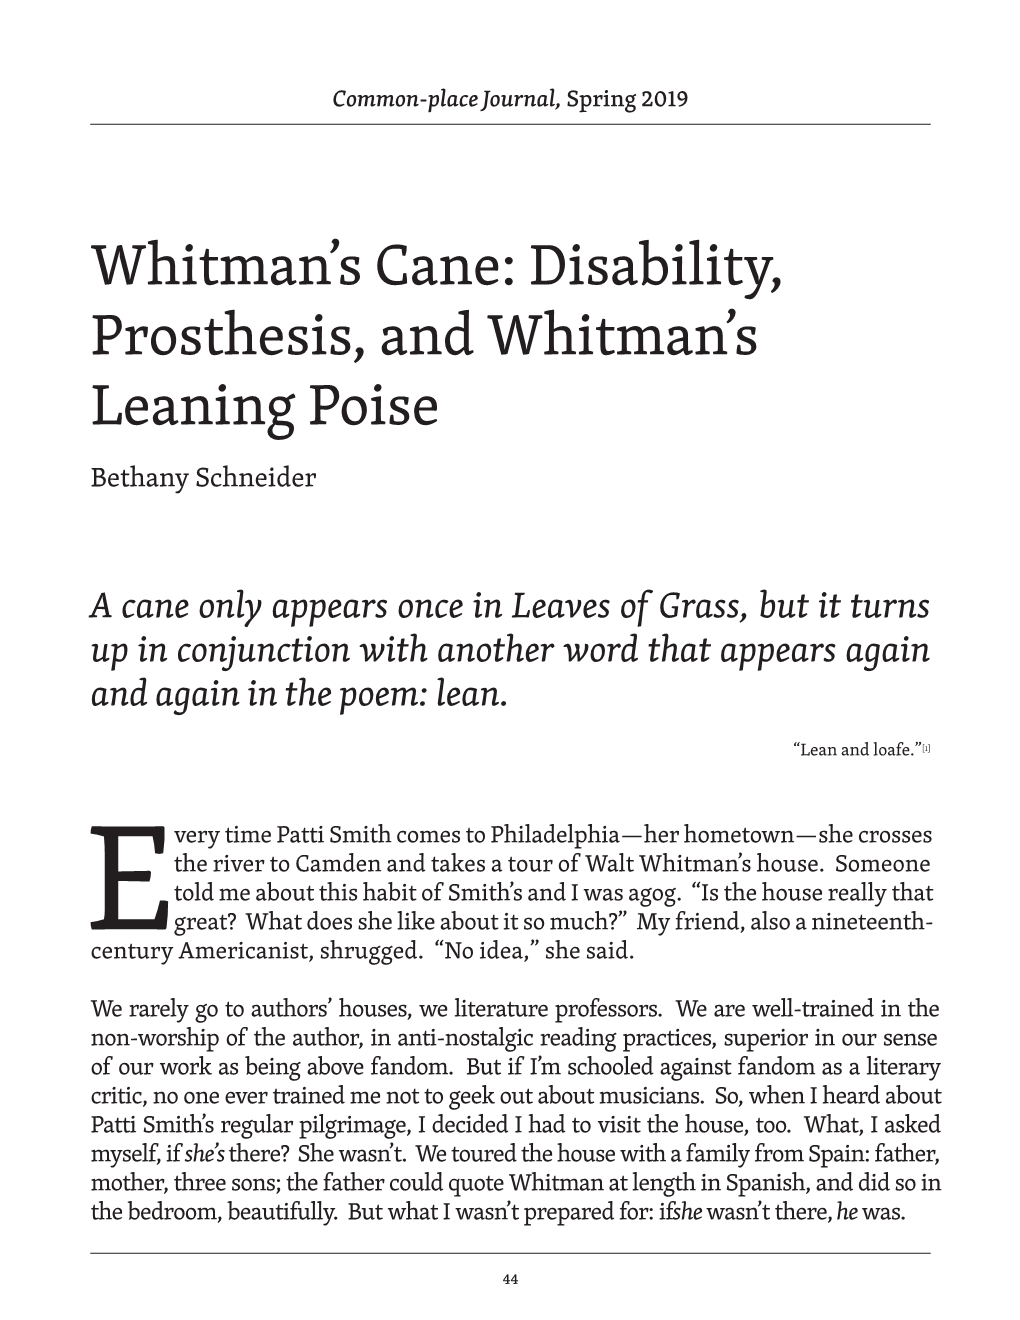 Whitman's Cane: Disability, Prosthesis, and Whitman's Leaning Poise